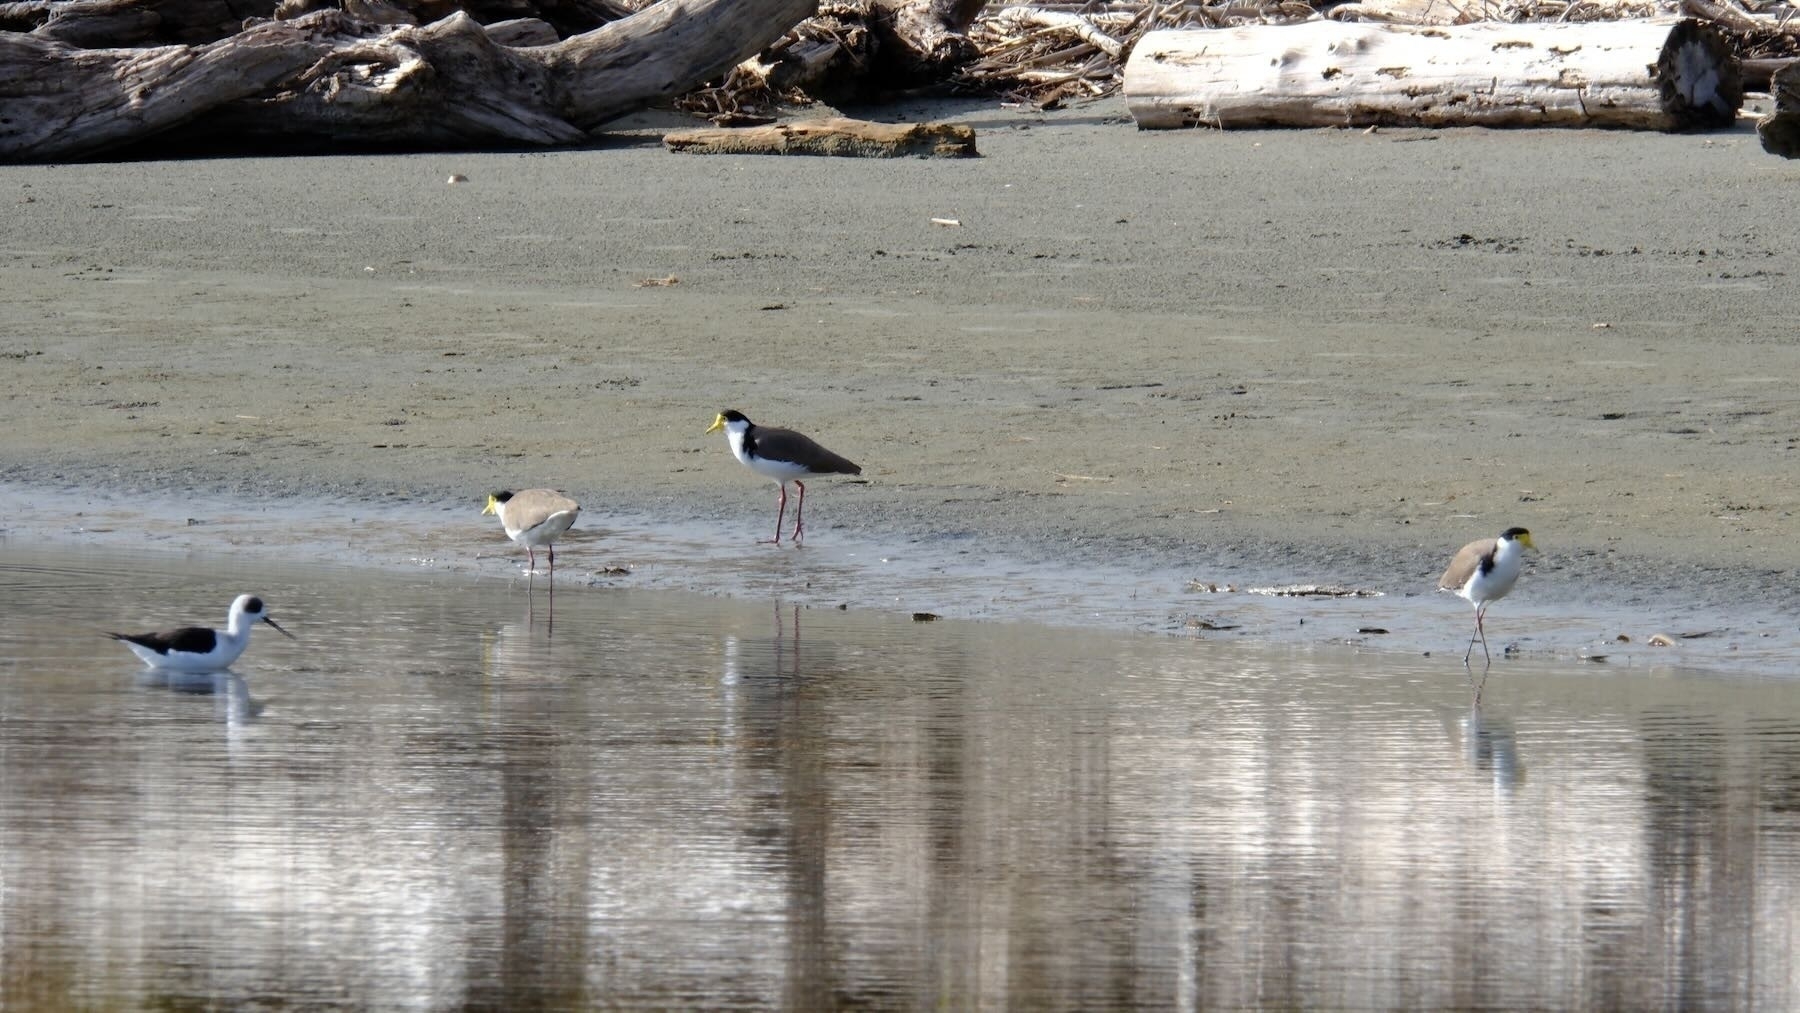 Spur-winged plovers, pied stilt by a large puddle of water. 